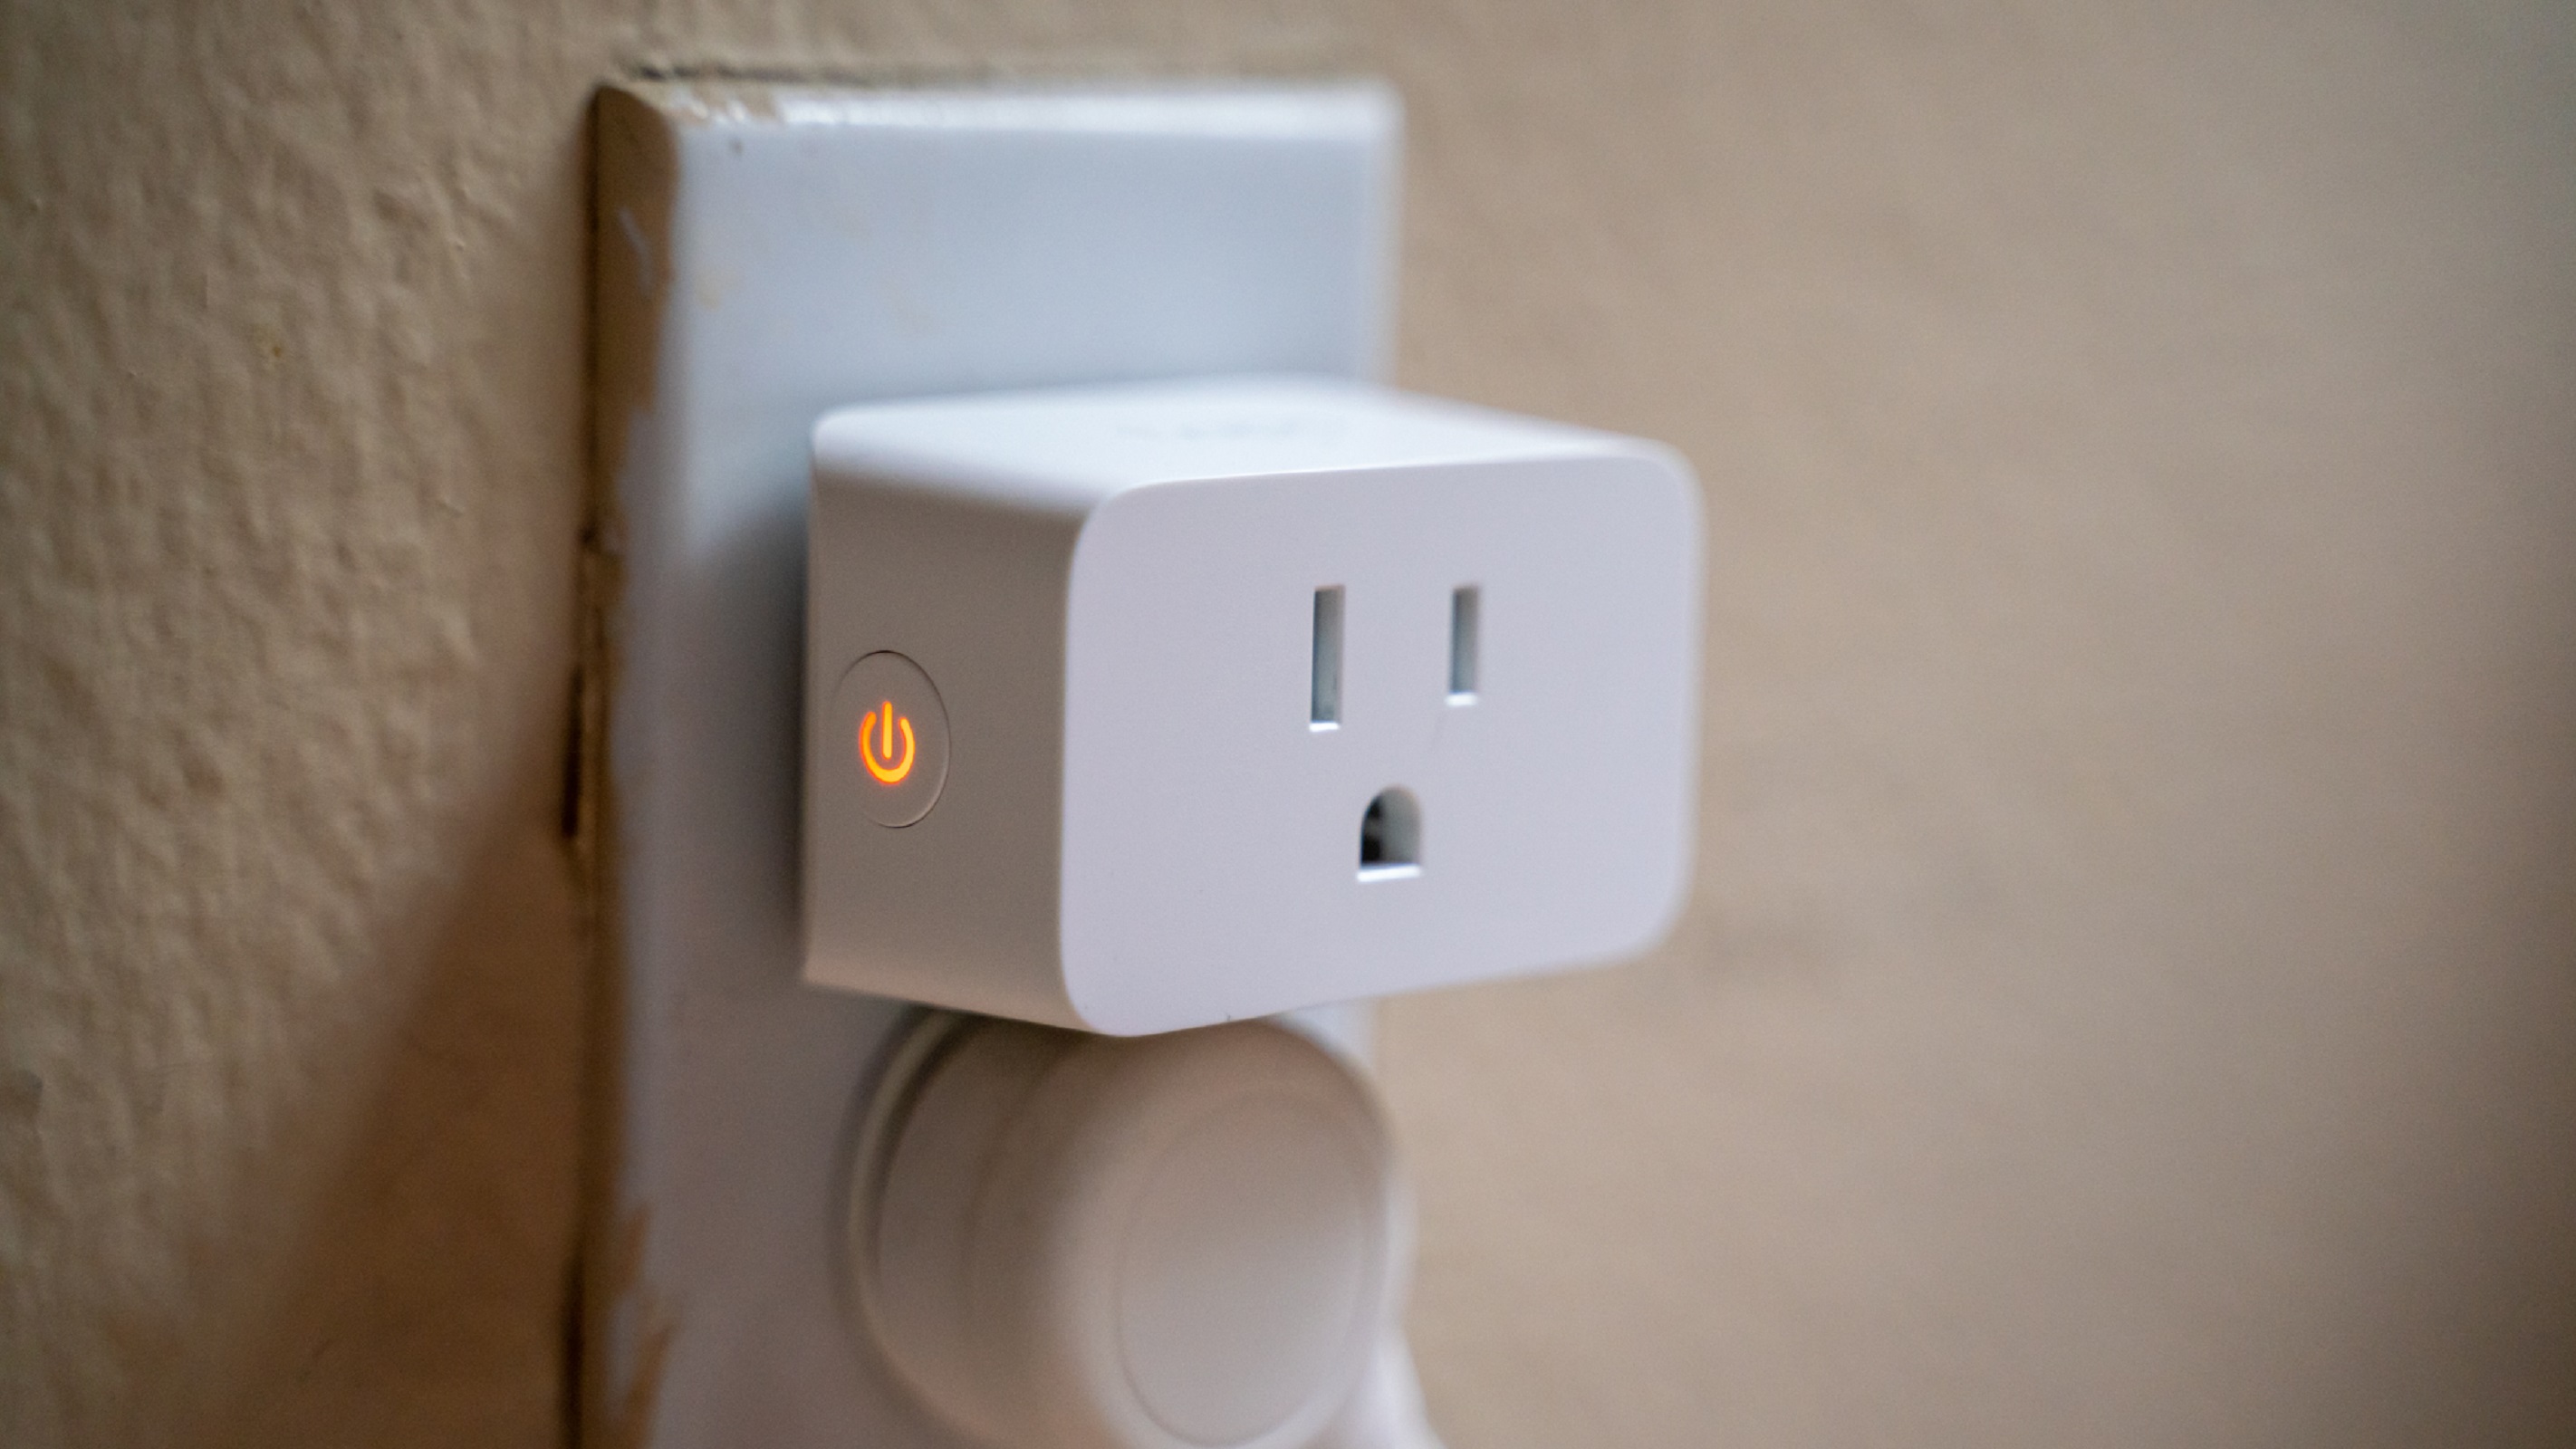 Tapo P125M smart plug with LED button on left side